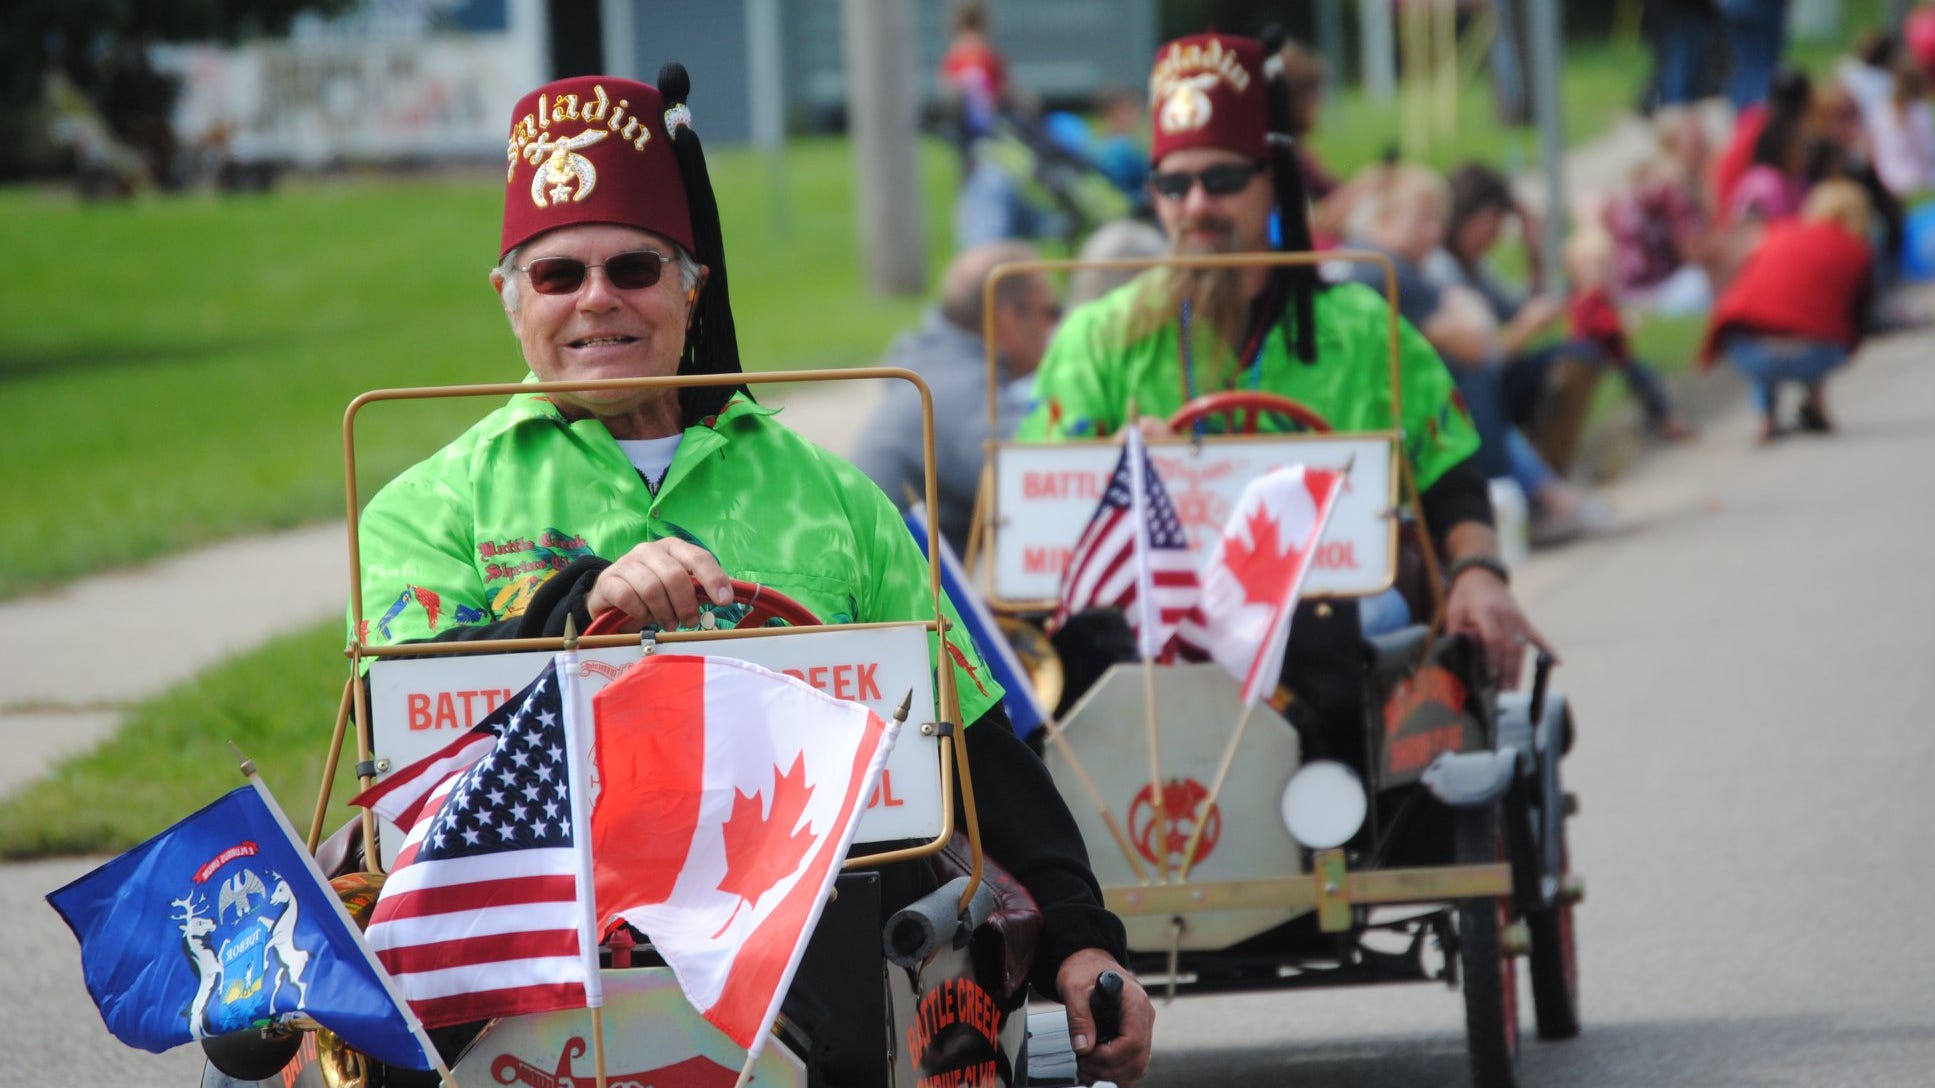 . Shriners helping children with medical needs for over a century